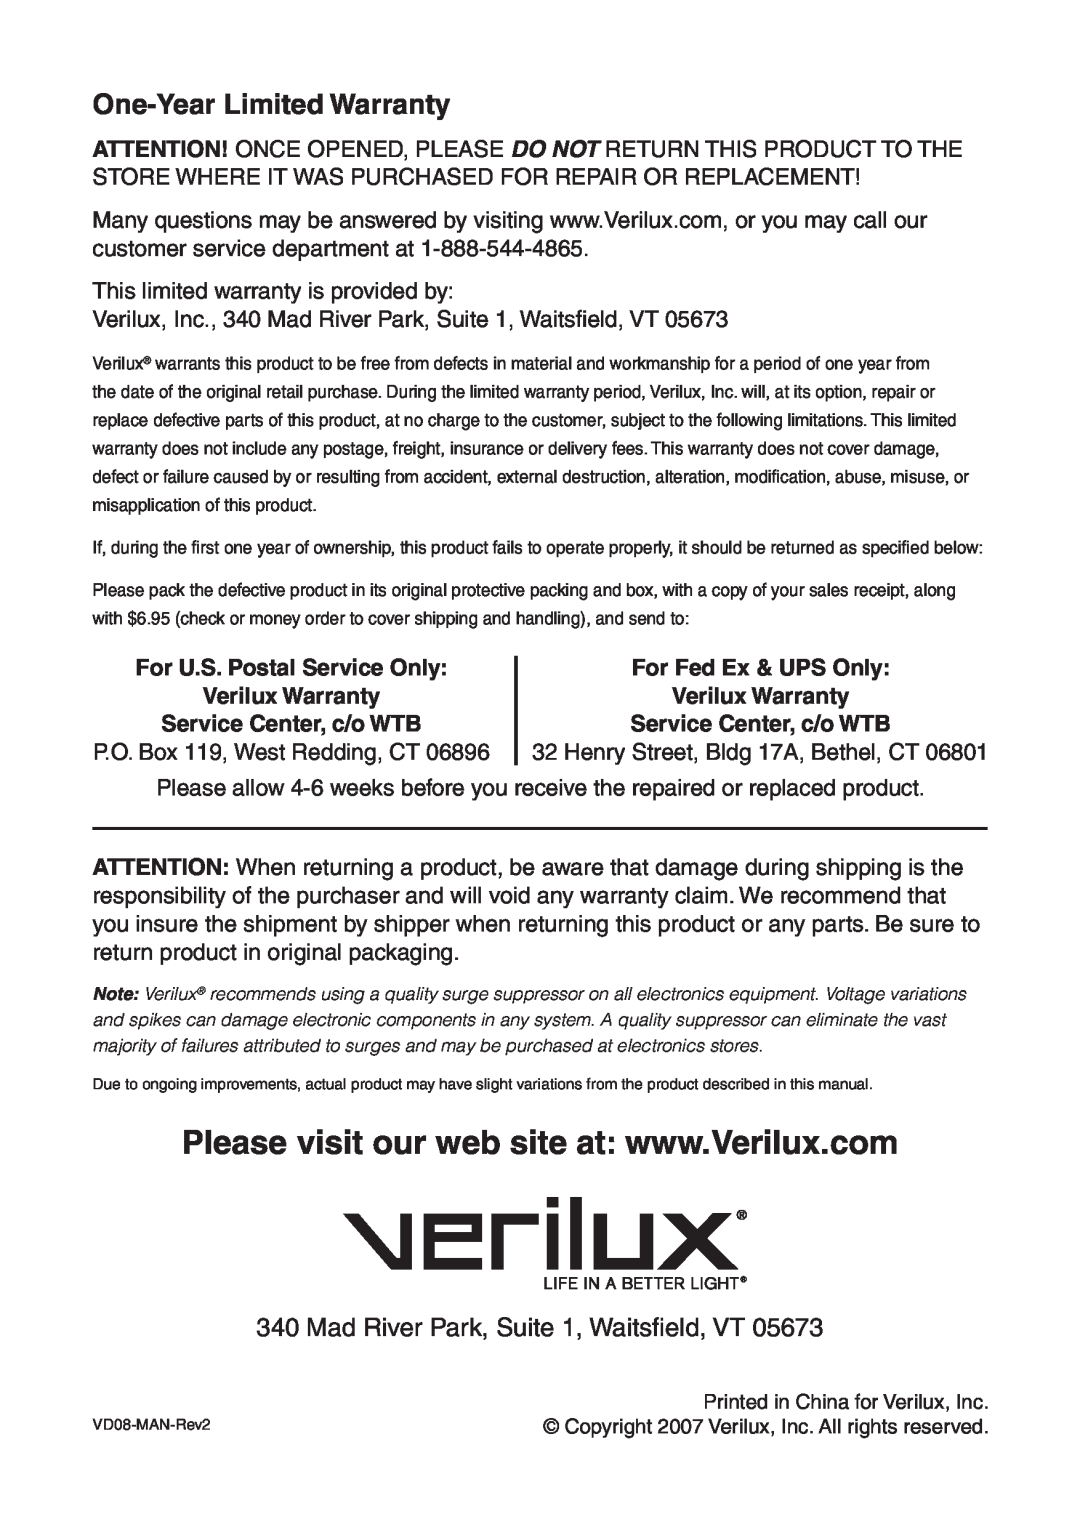 Verilux VD08 manual One-YearLimited Warranty, Mad River Park, Suite 1, Waitsﬁeld, VT, Service Center, c/o WTB 